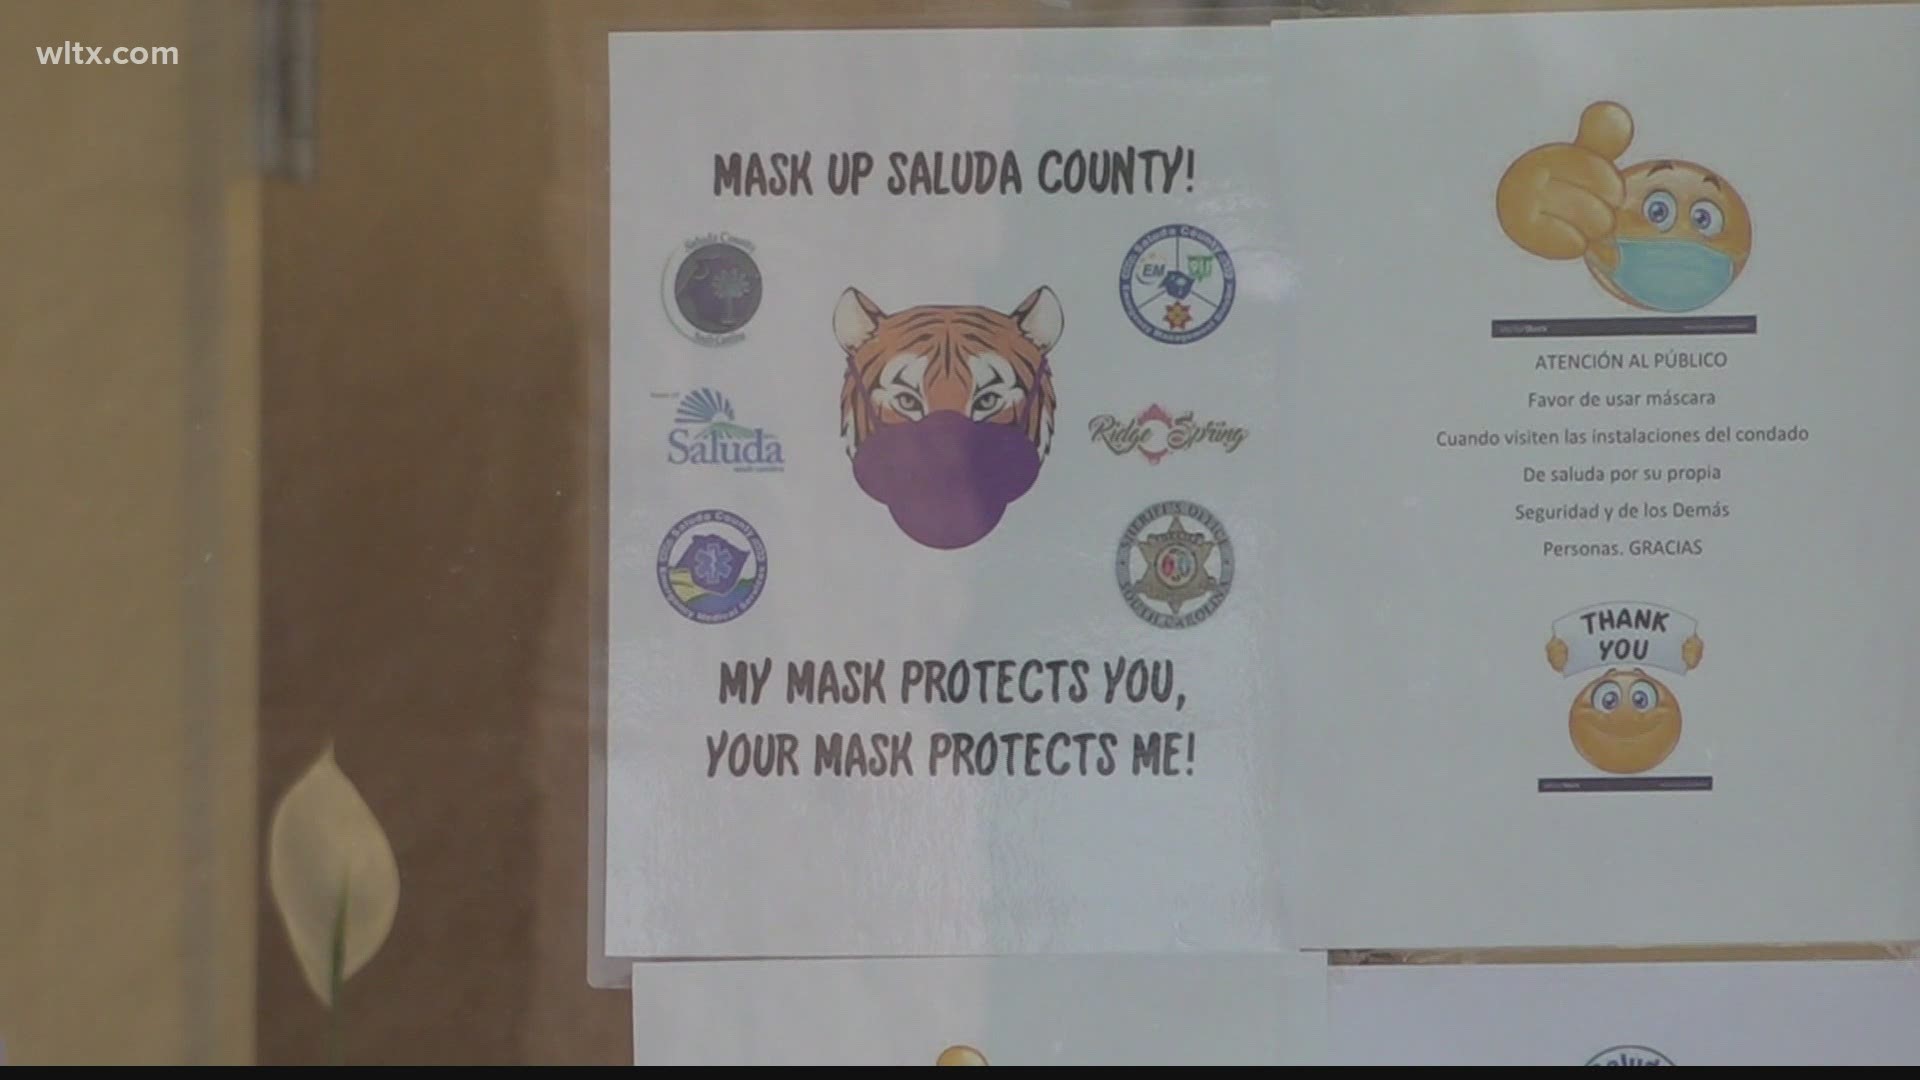 Saluda County is working with partners to provide vaccination opportunities to residents.